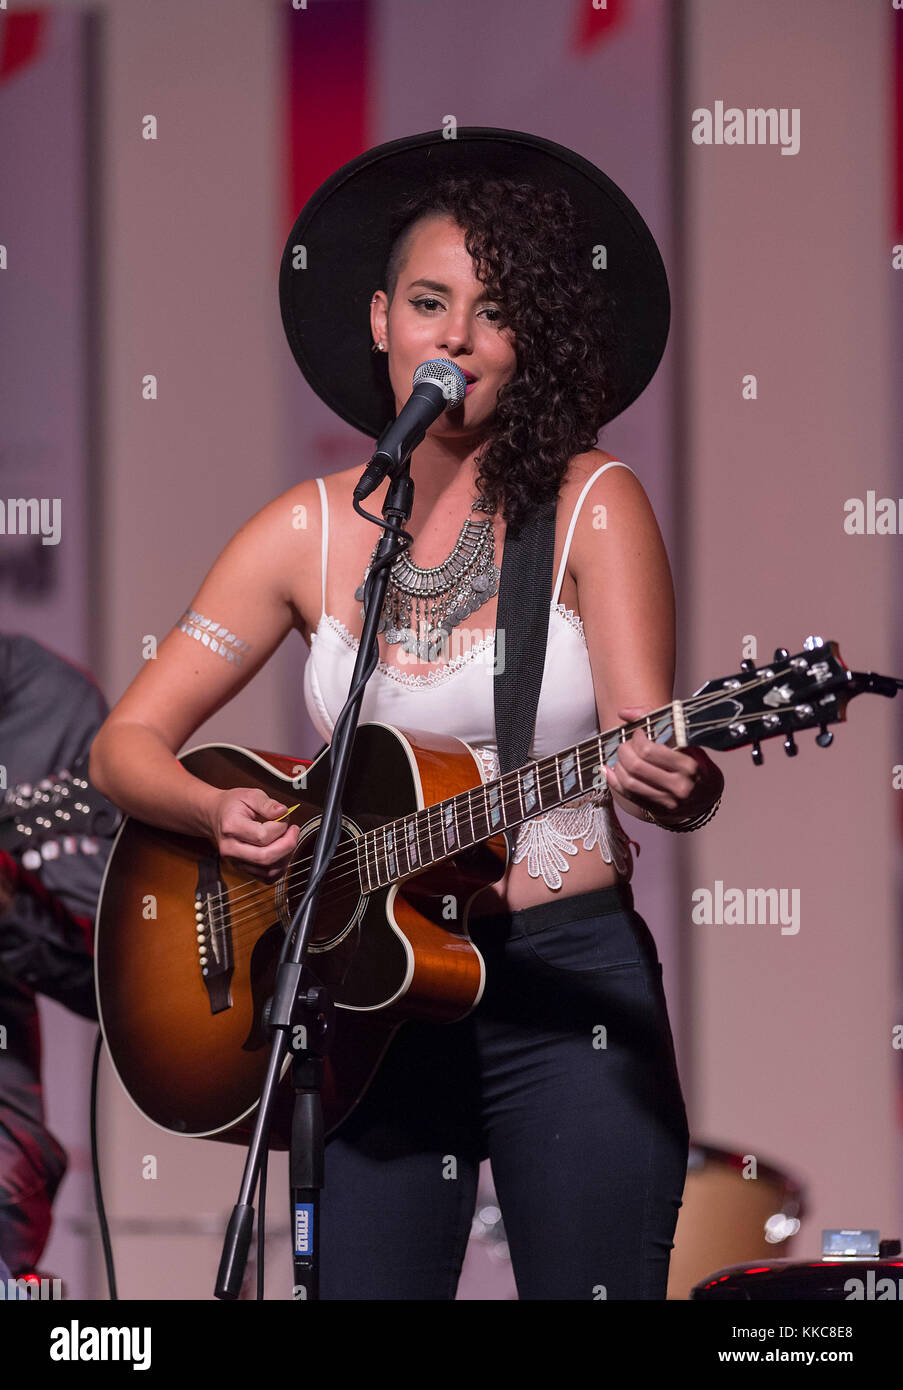 MIAMI, FL - APRIL 27: Raquel Sofia performs at the “BLMA Storytellers: Acoustic Session” held at the Gibson Miami Showroom on April 27th in Miami. This event is the first of several performances leading up to the 2015 Latin Billboard Awards Ceremony on April 27, 2015 in Miami Florida   People:  Raquel Sofia Stock Photo